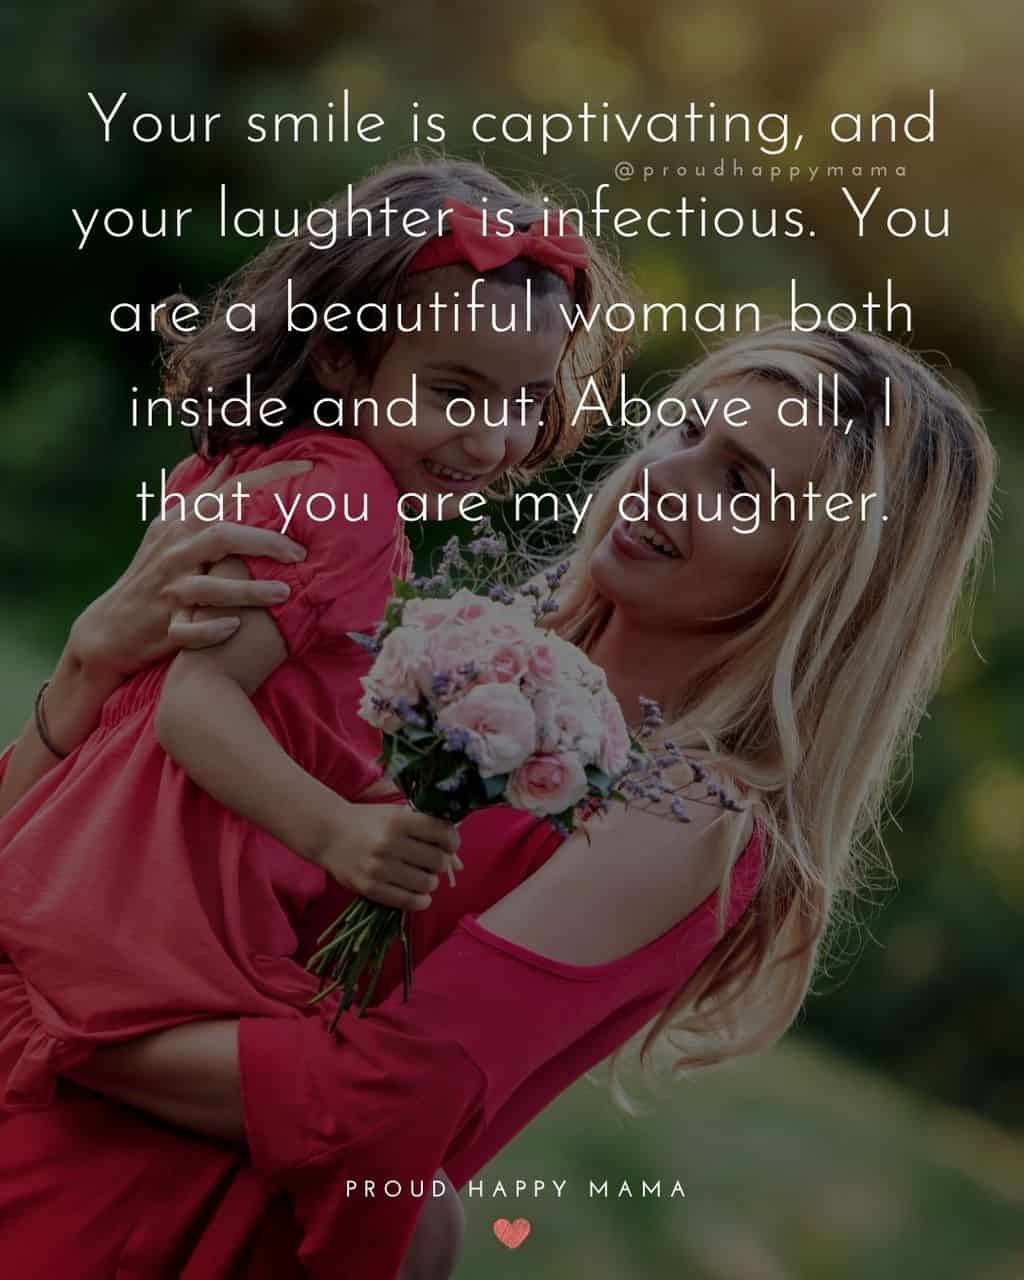 love for daughter quotes - ‘Your smile is captivating, and your laughter is infectious. You are a beautiful woman both inside and out. Above all, I